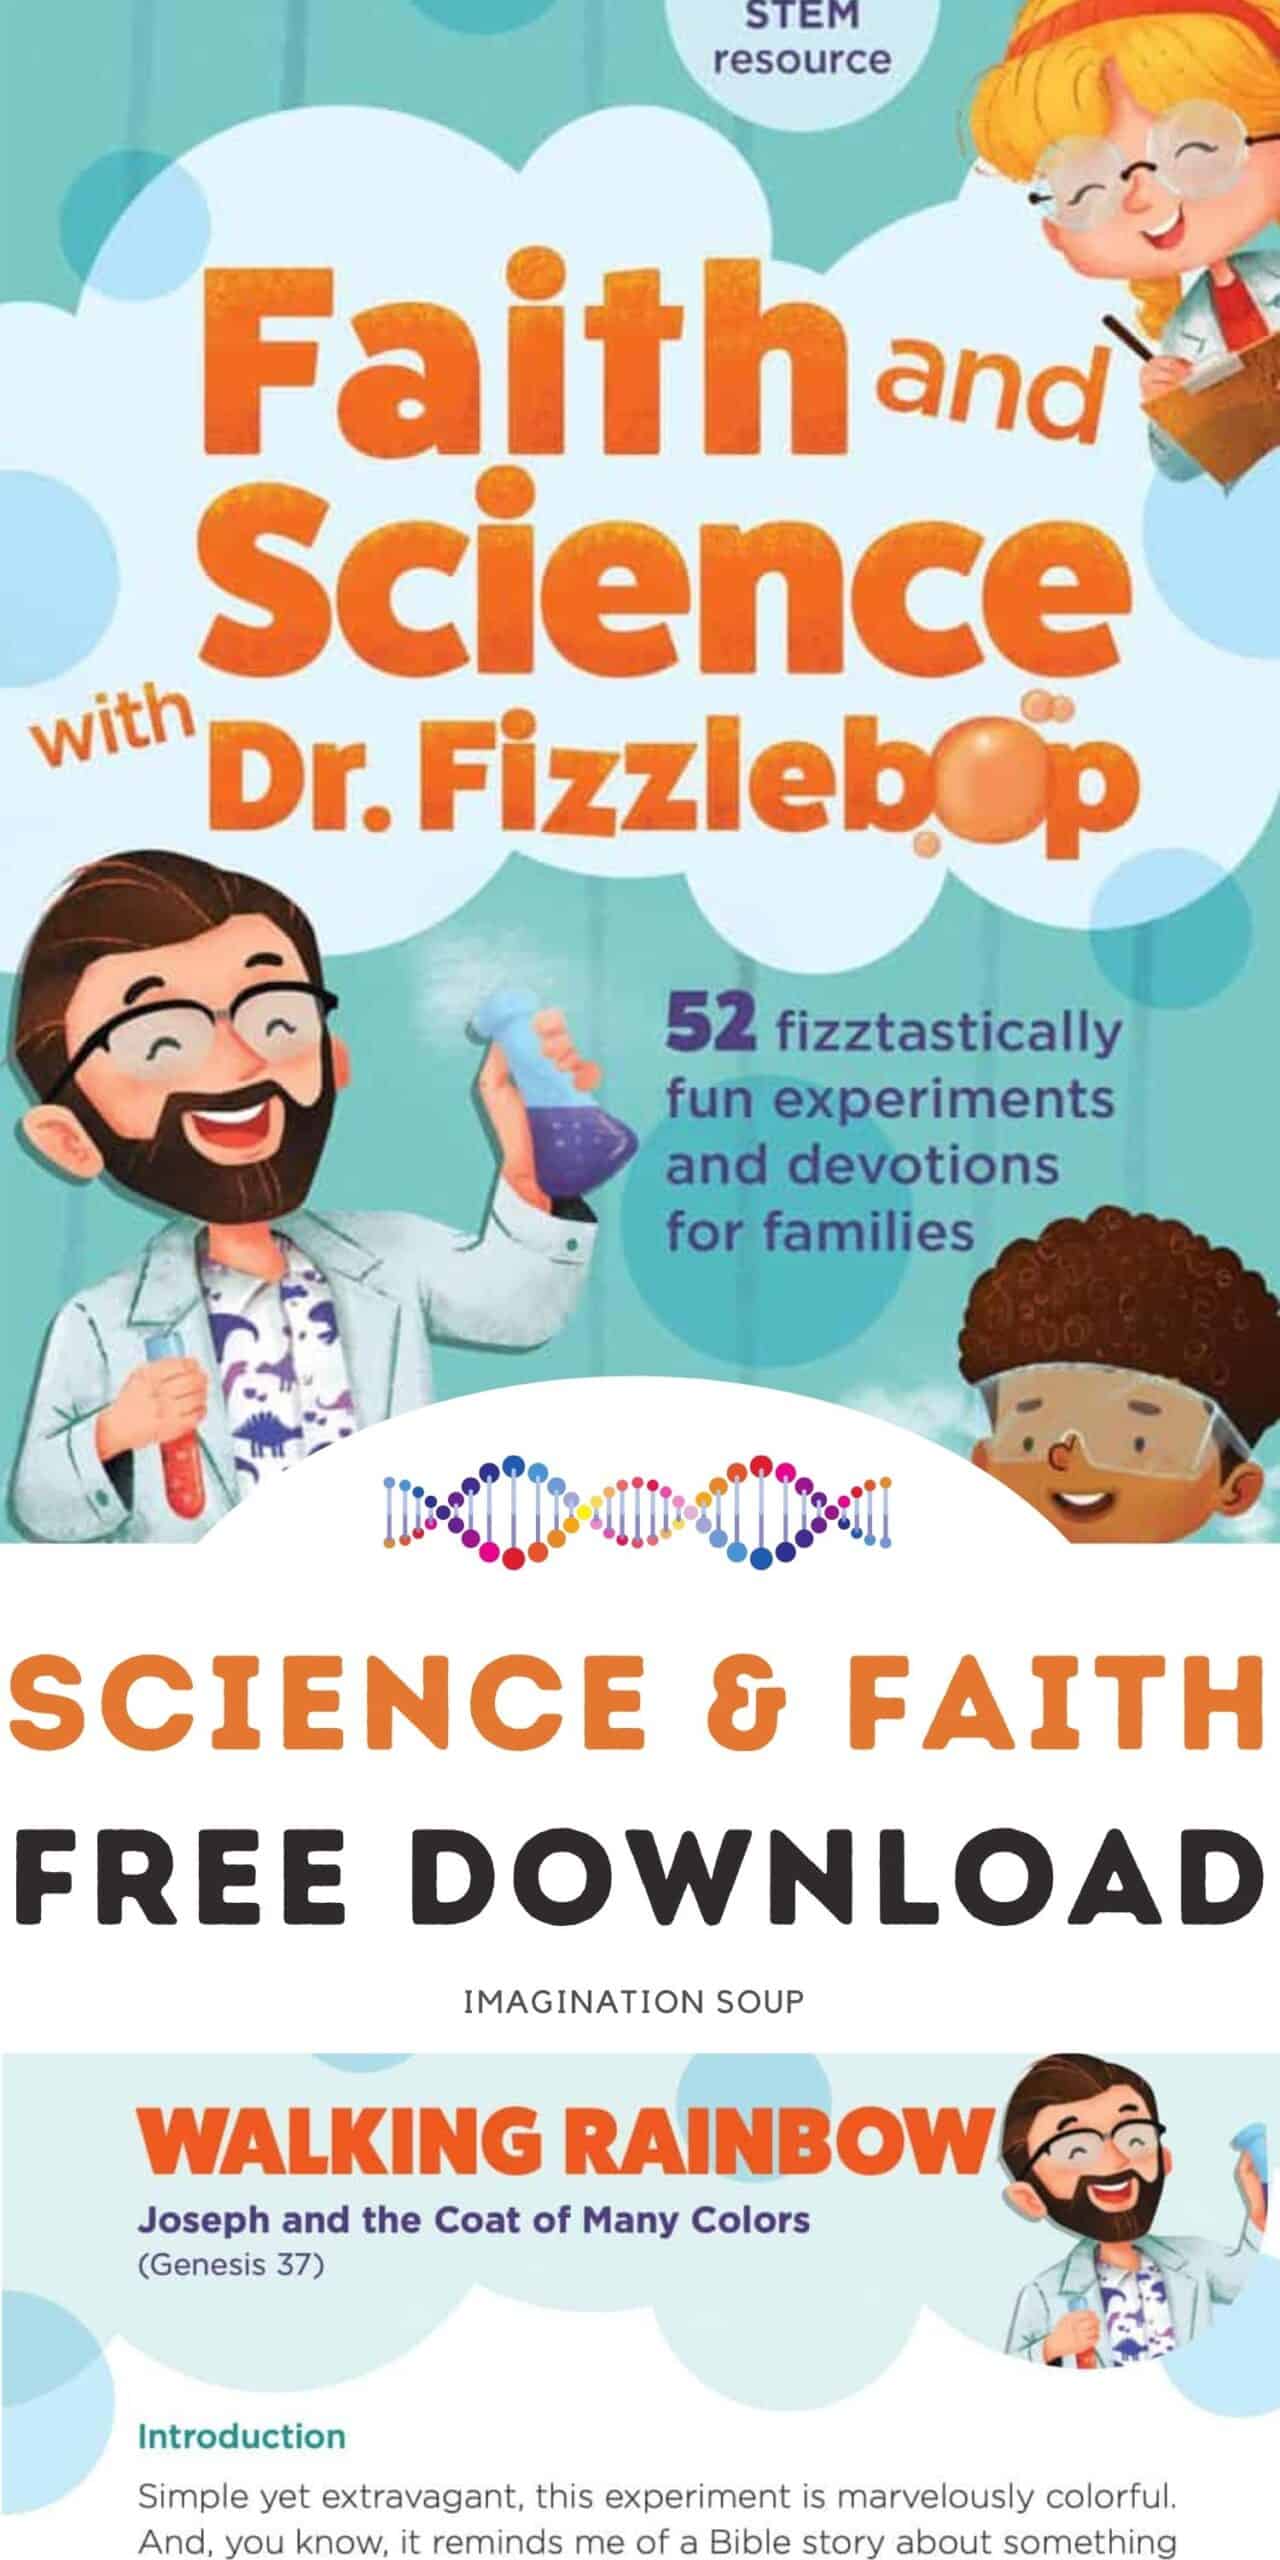 Try a fun rainbow experiment from the Faith and Science with Dr. Fizzlebop book by Brock Eastman